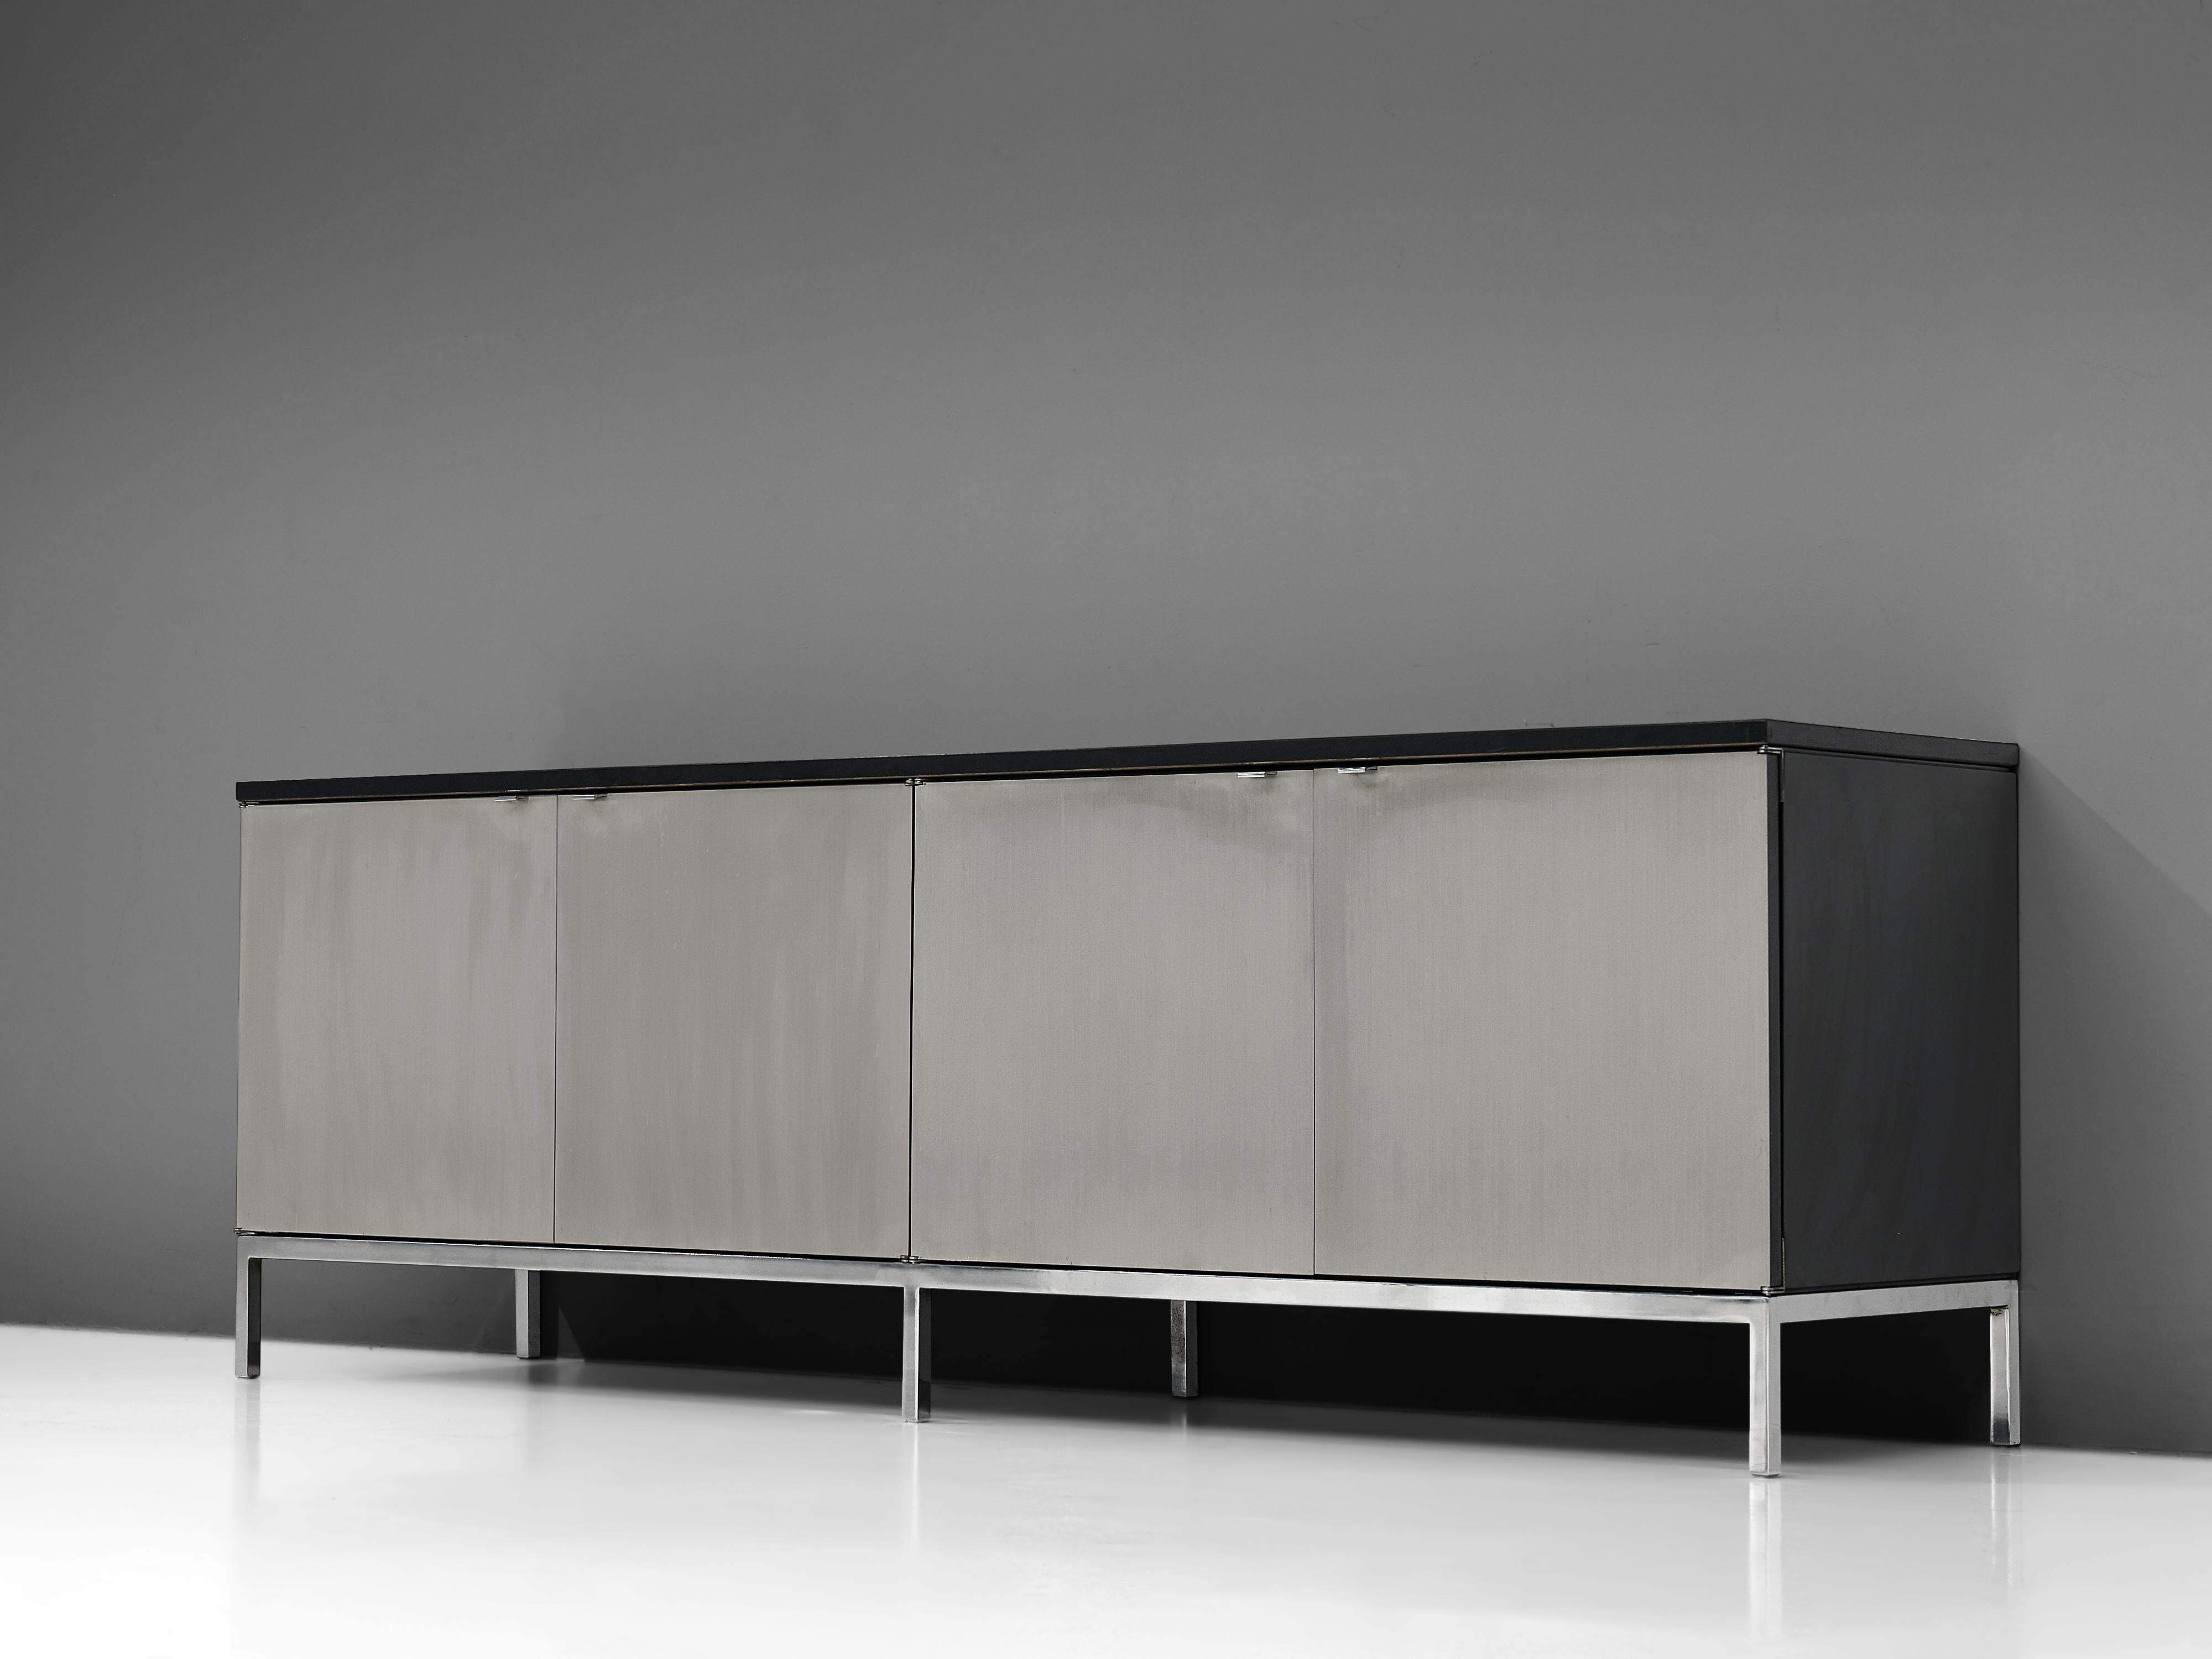 Florence Knoll for Knoll International, credenza, ebonized oak, brushed steel, United States, designed in early 1960s

Large credenza with a chrome base designed by Florence Knoll for Knoll International. This exceptional and minimalistic designed